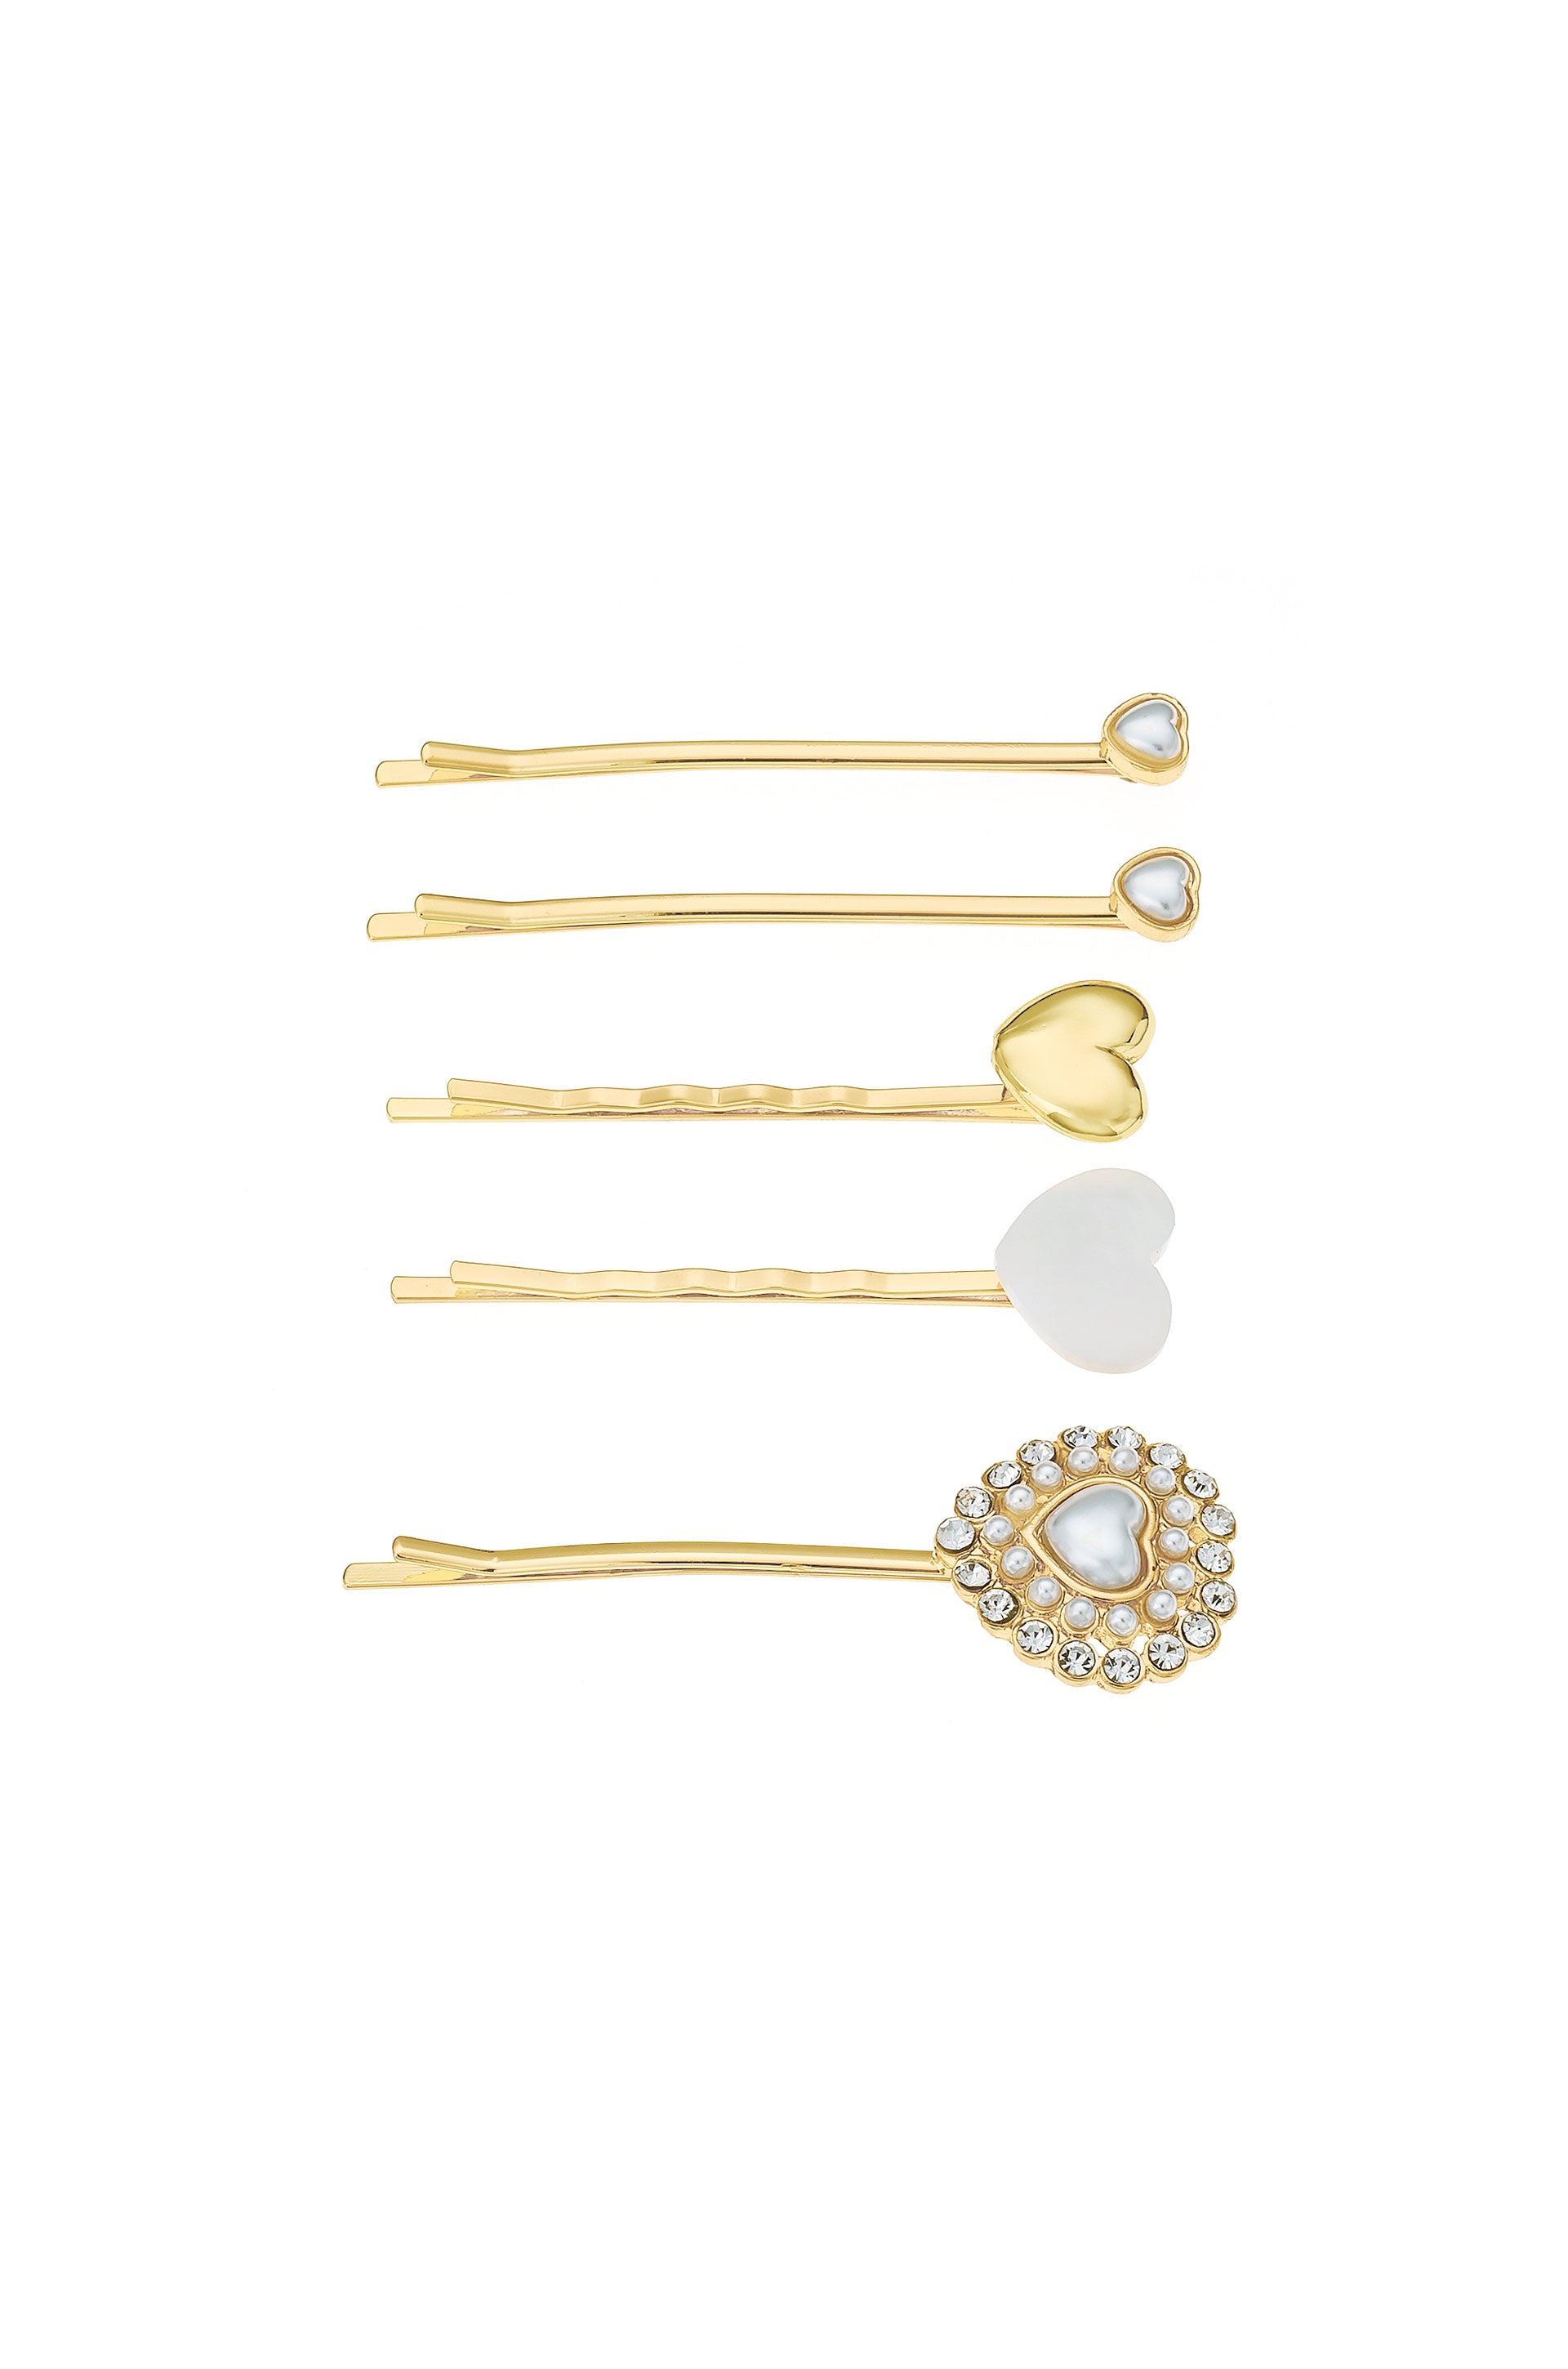 Lonely Hearts Club Hair Pin Set on white